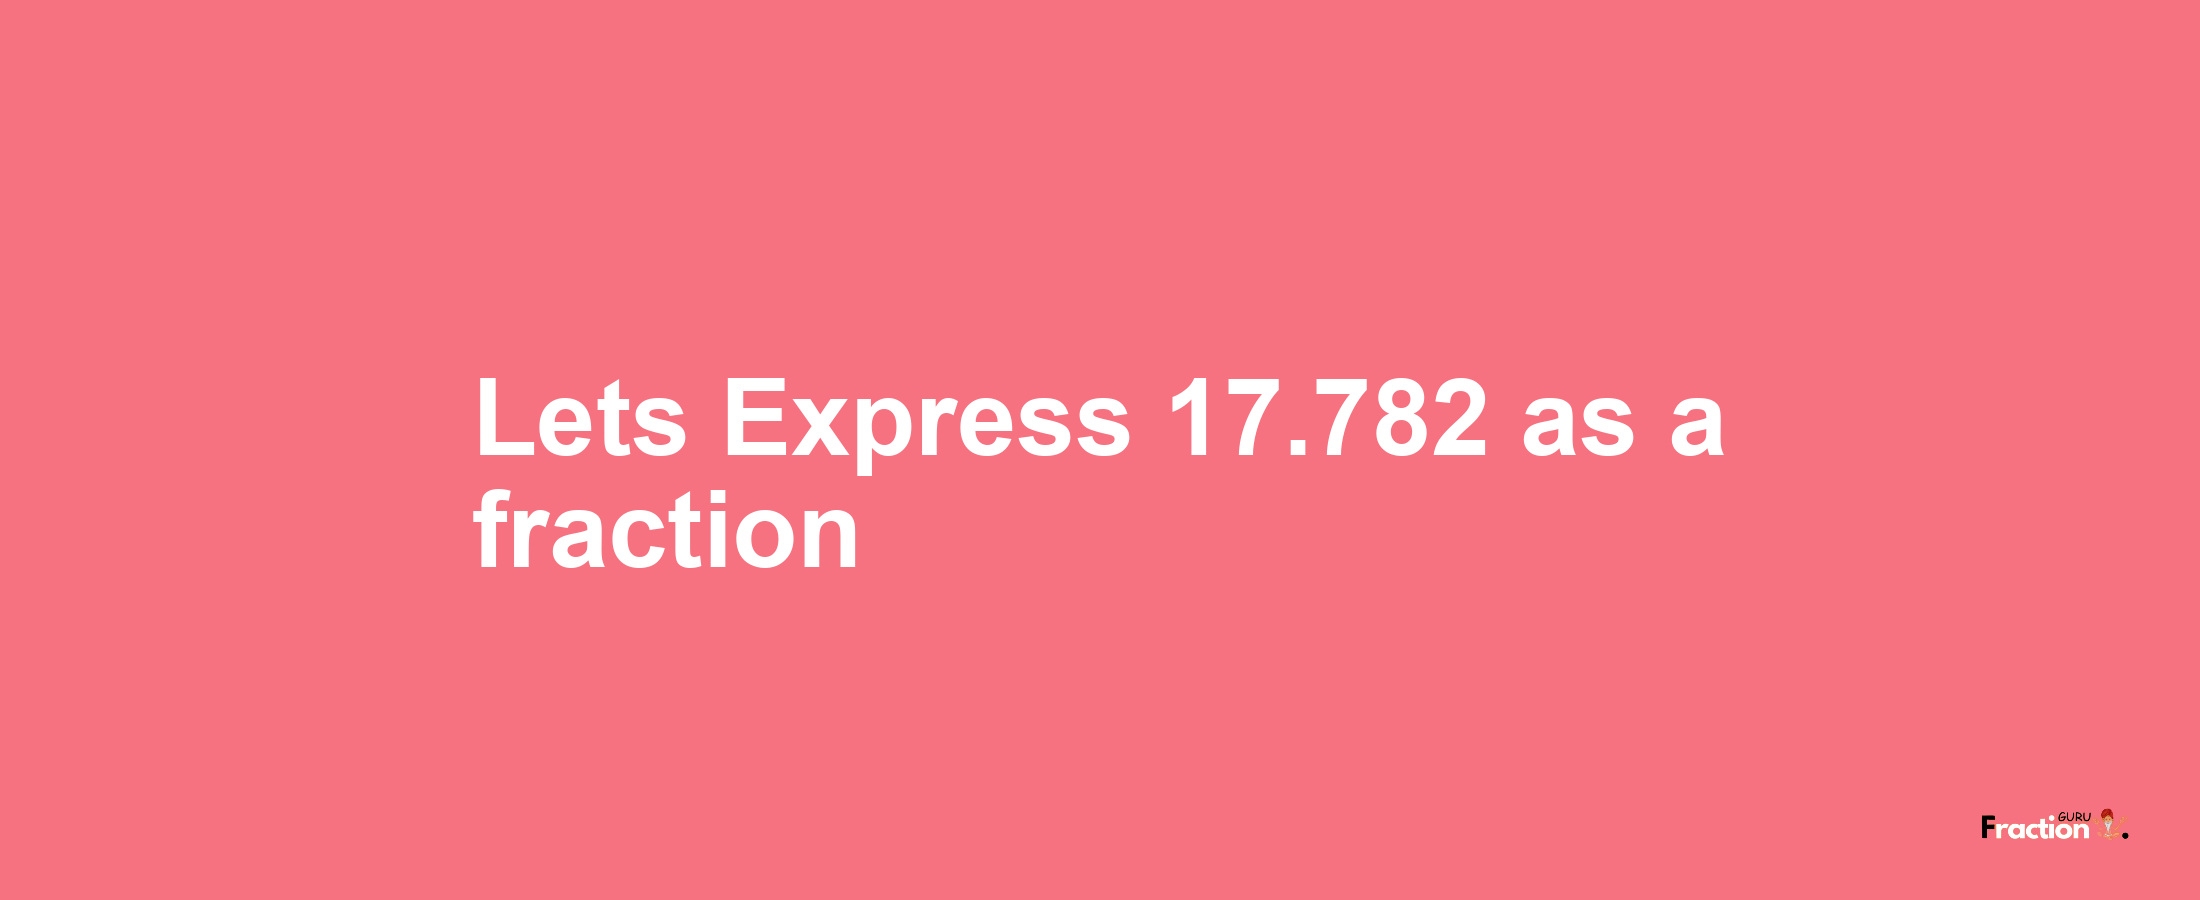 Lets Express 17.782 as afraction